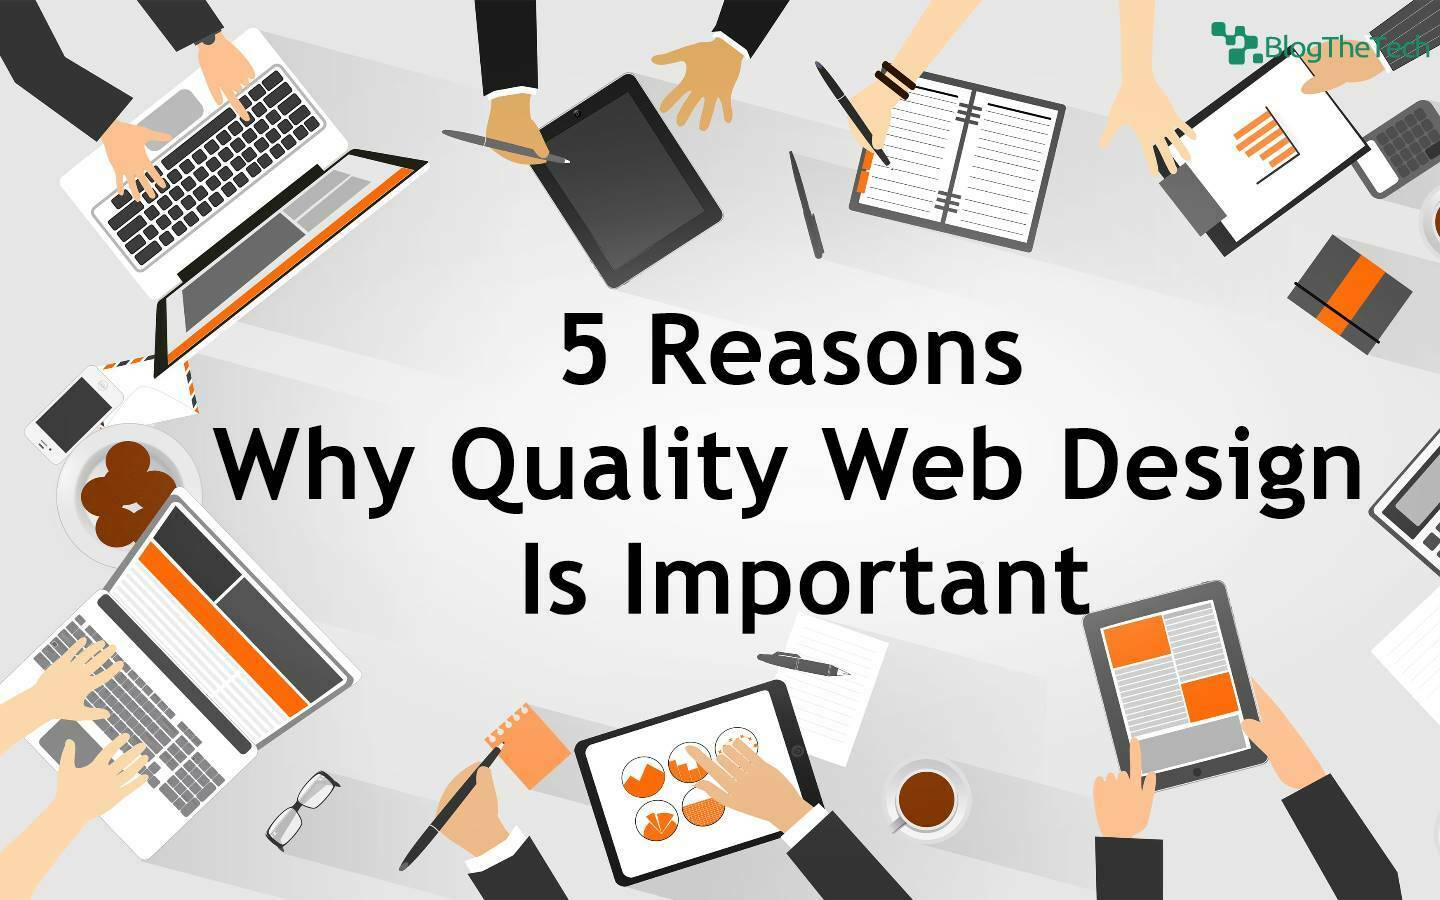 5 Reasons Why Quality Web Design Is Important